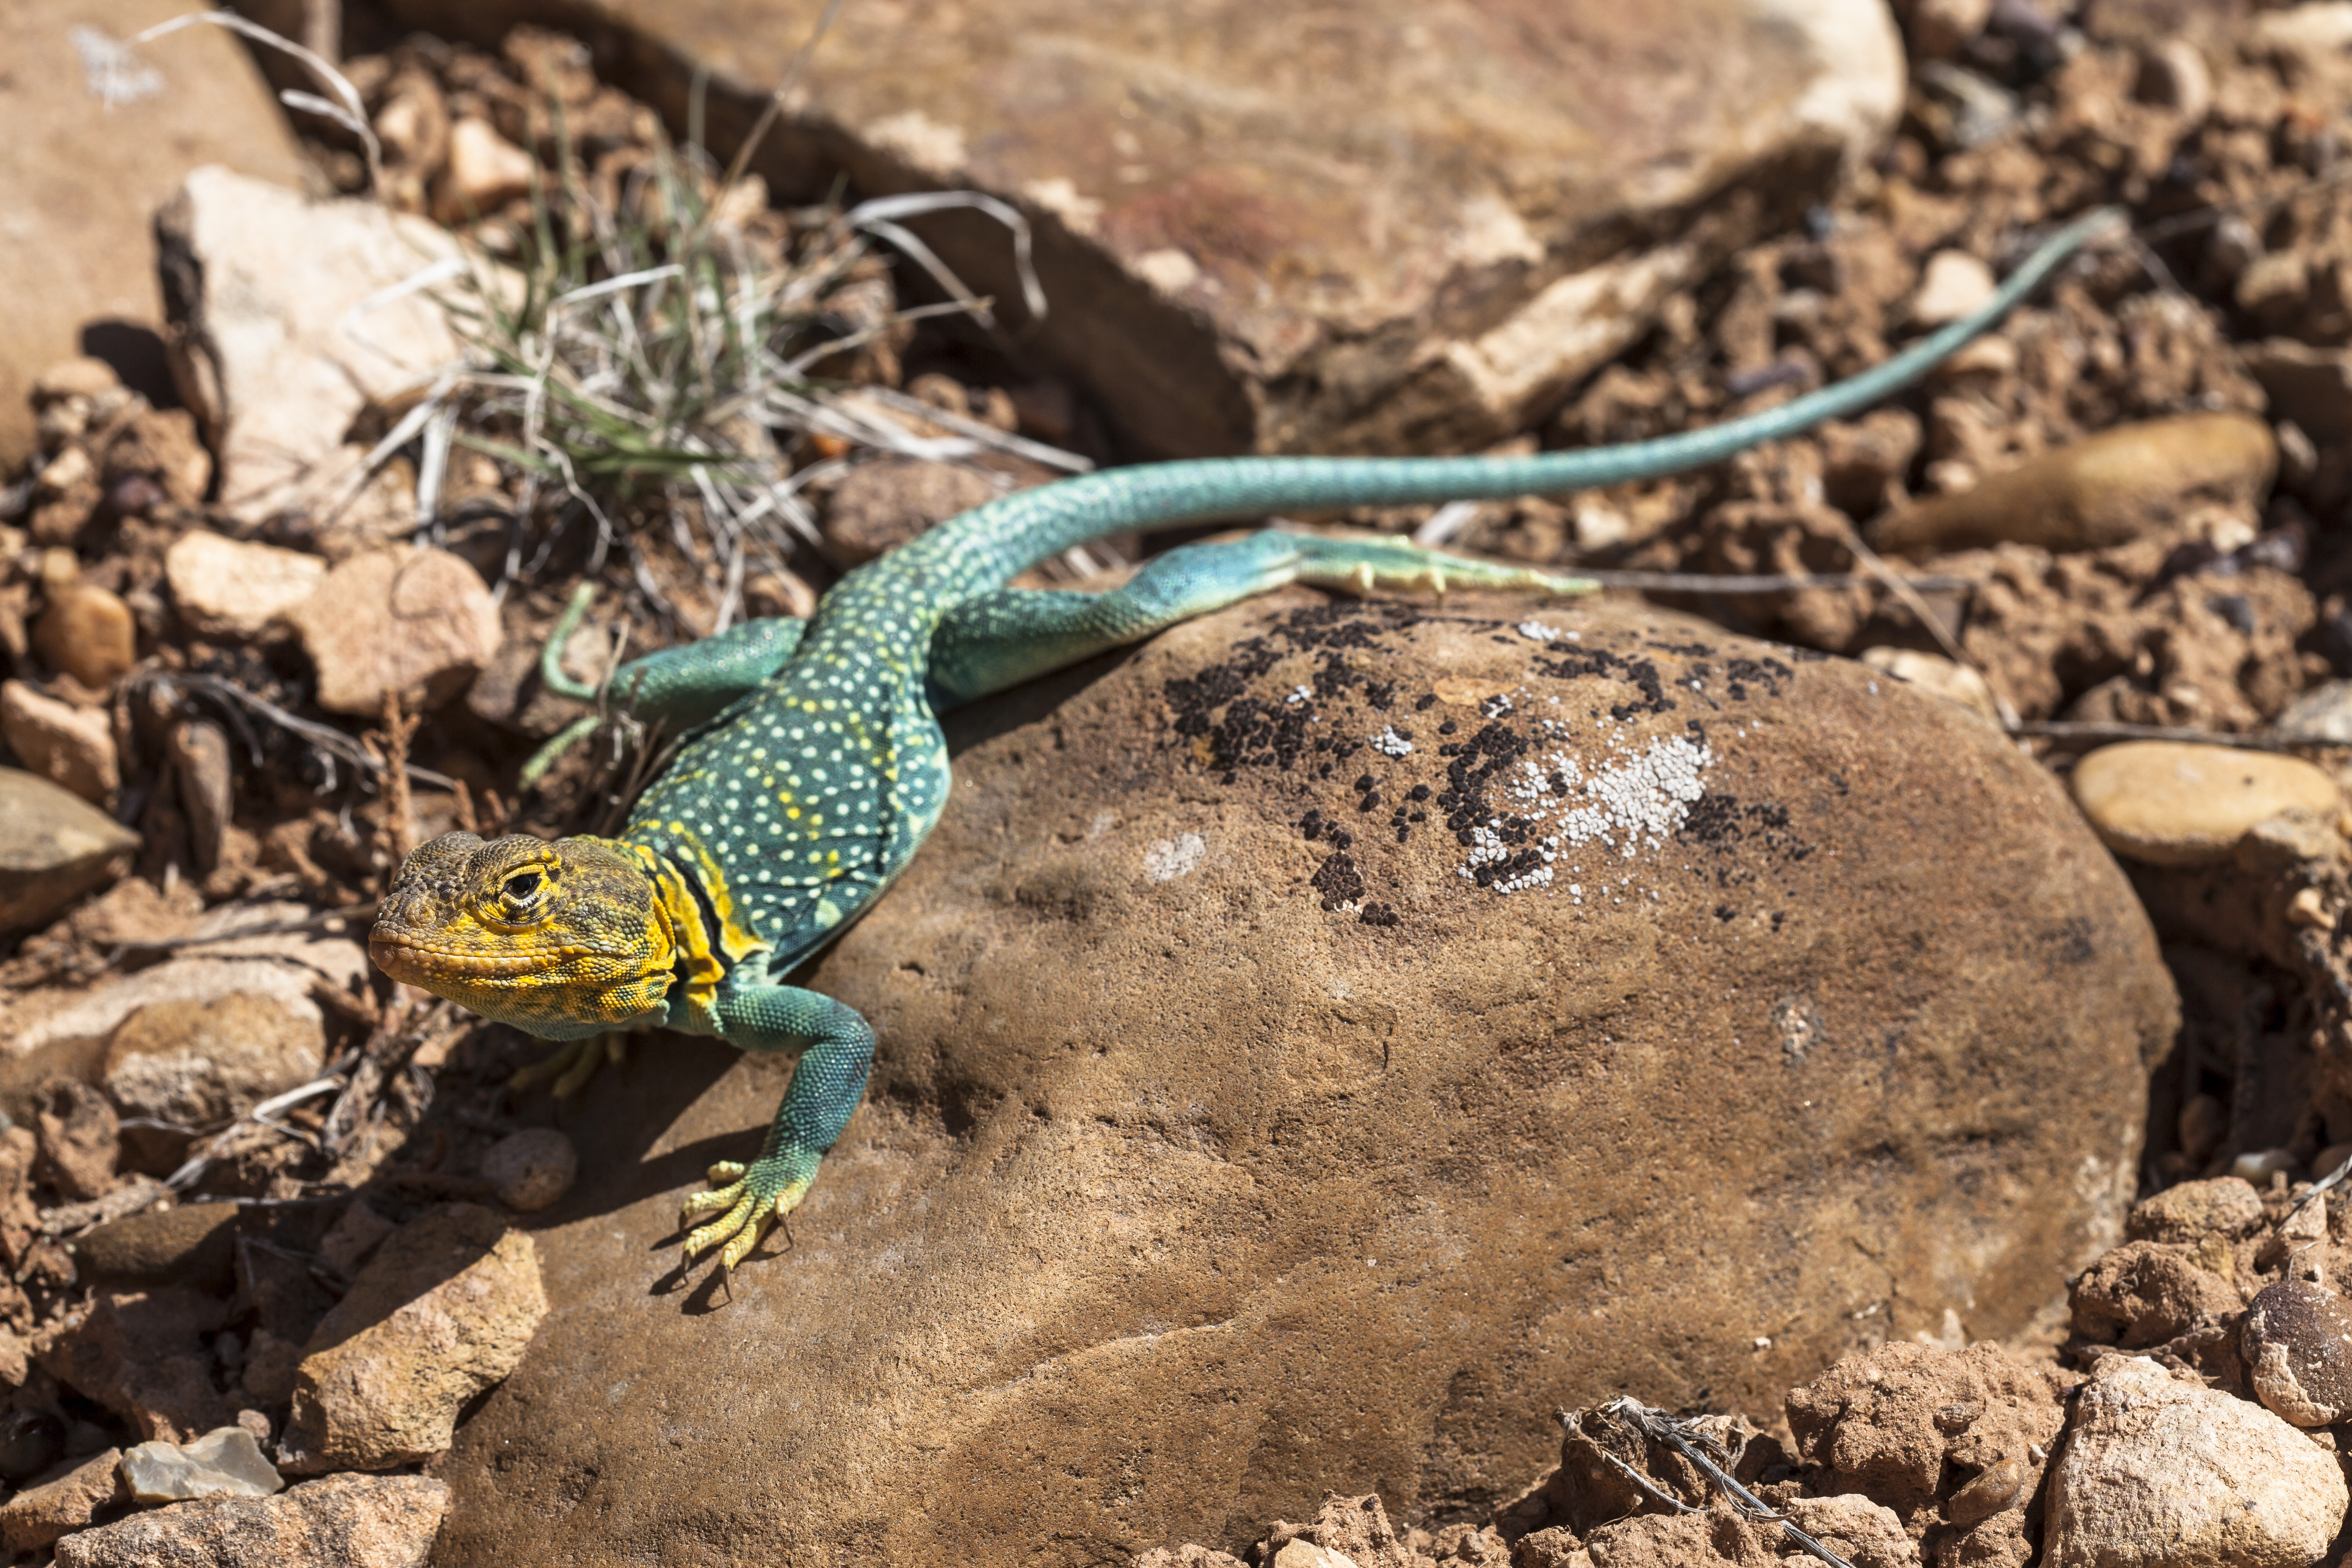 a green lizard with yellow head, yellow spots and black collar